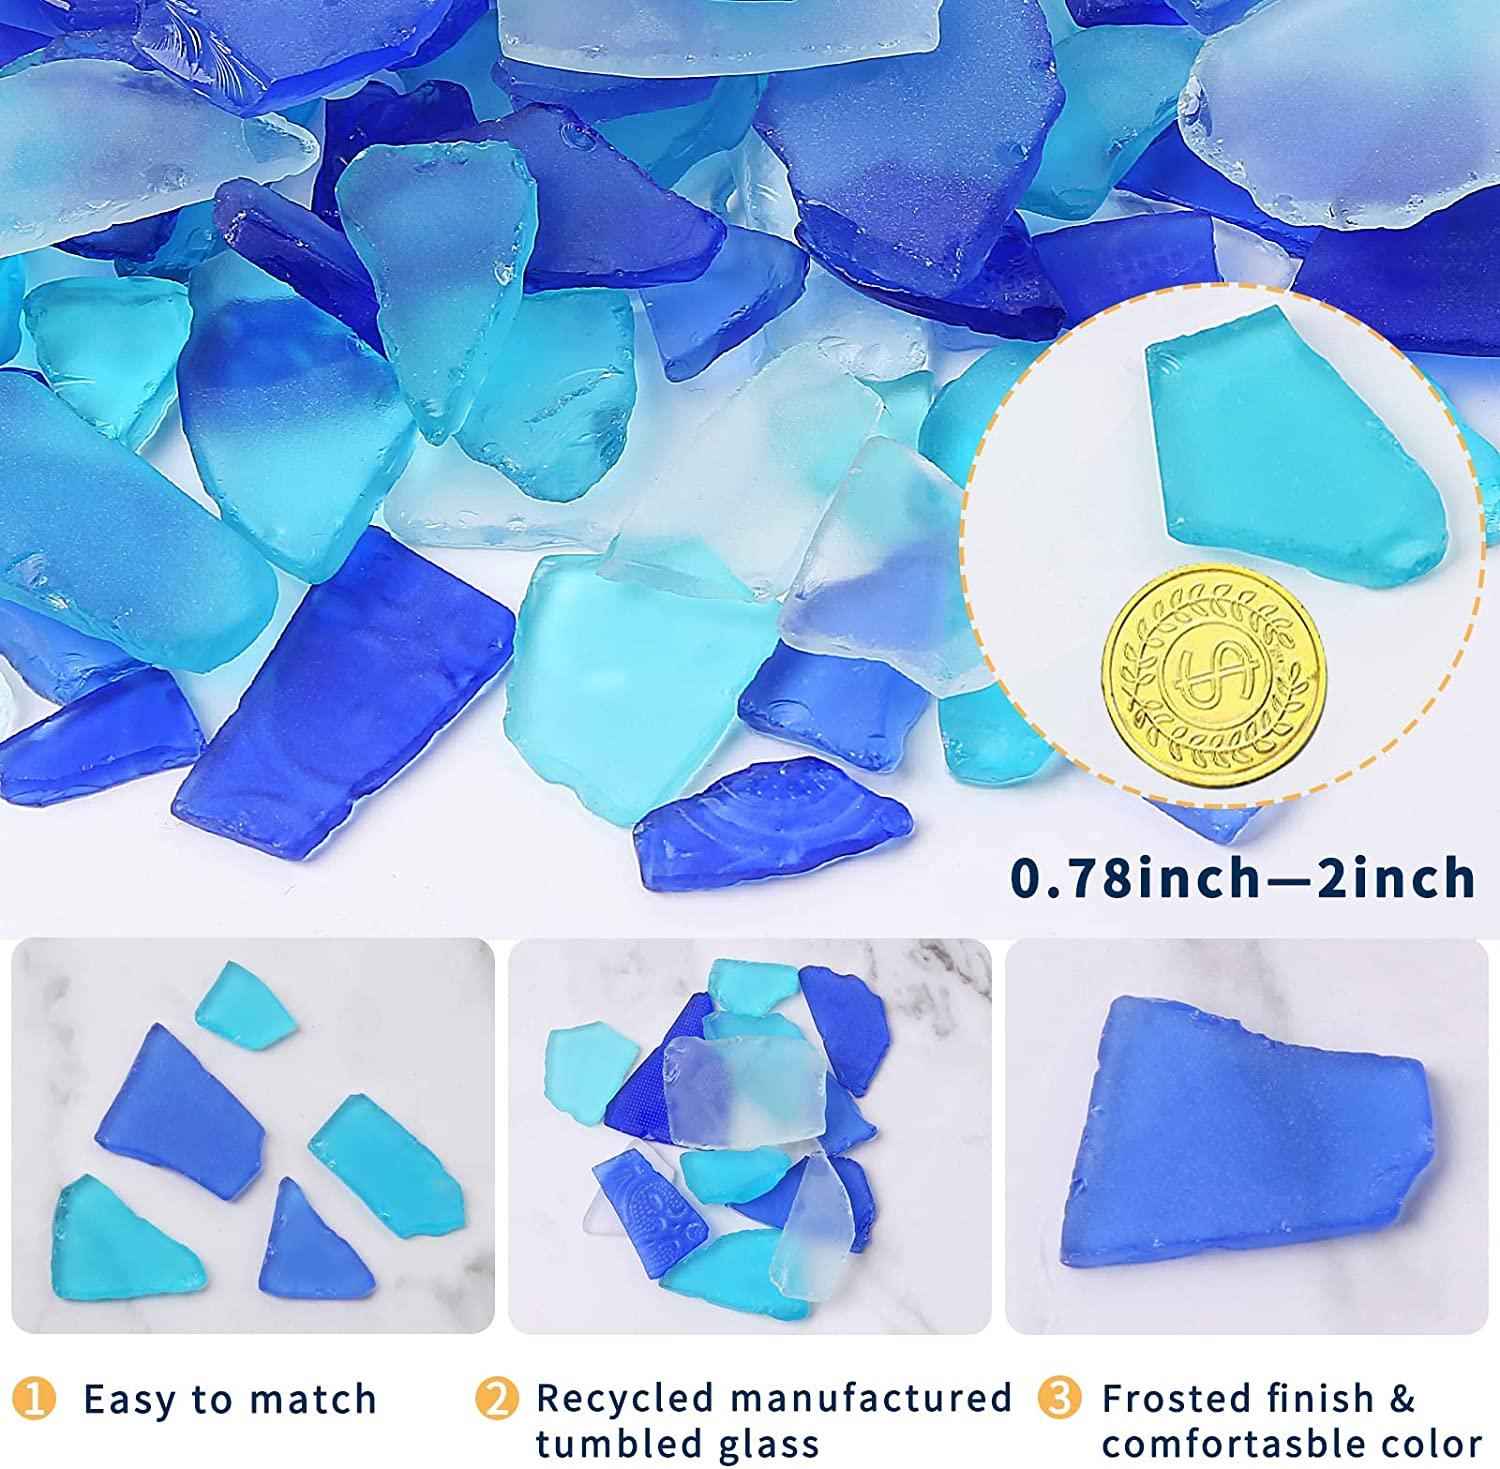 Sea Glass for Crafts - Decorative Frosted Seaglass Pieces - 16oz